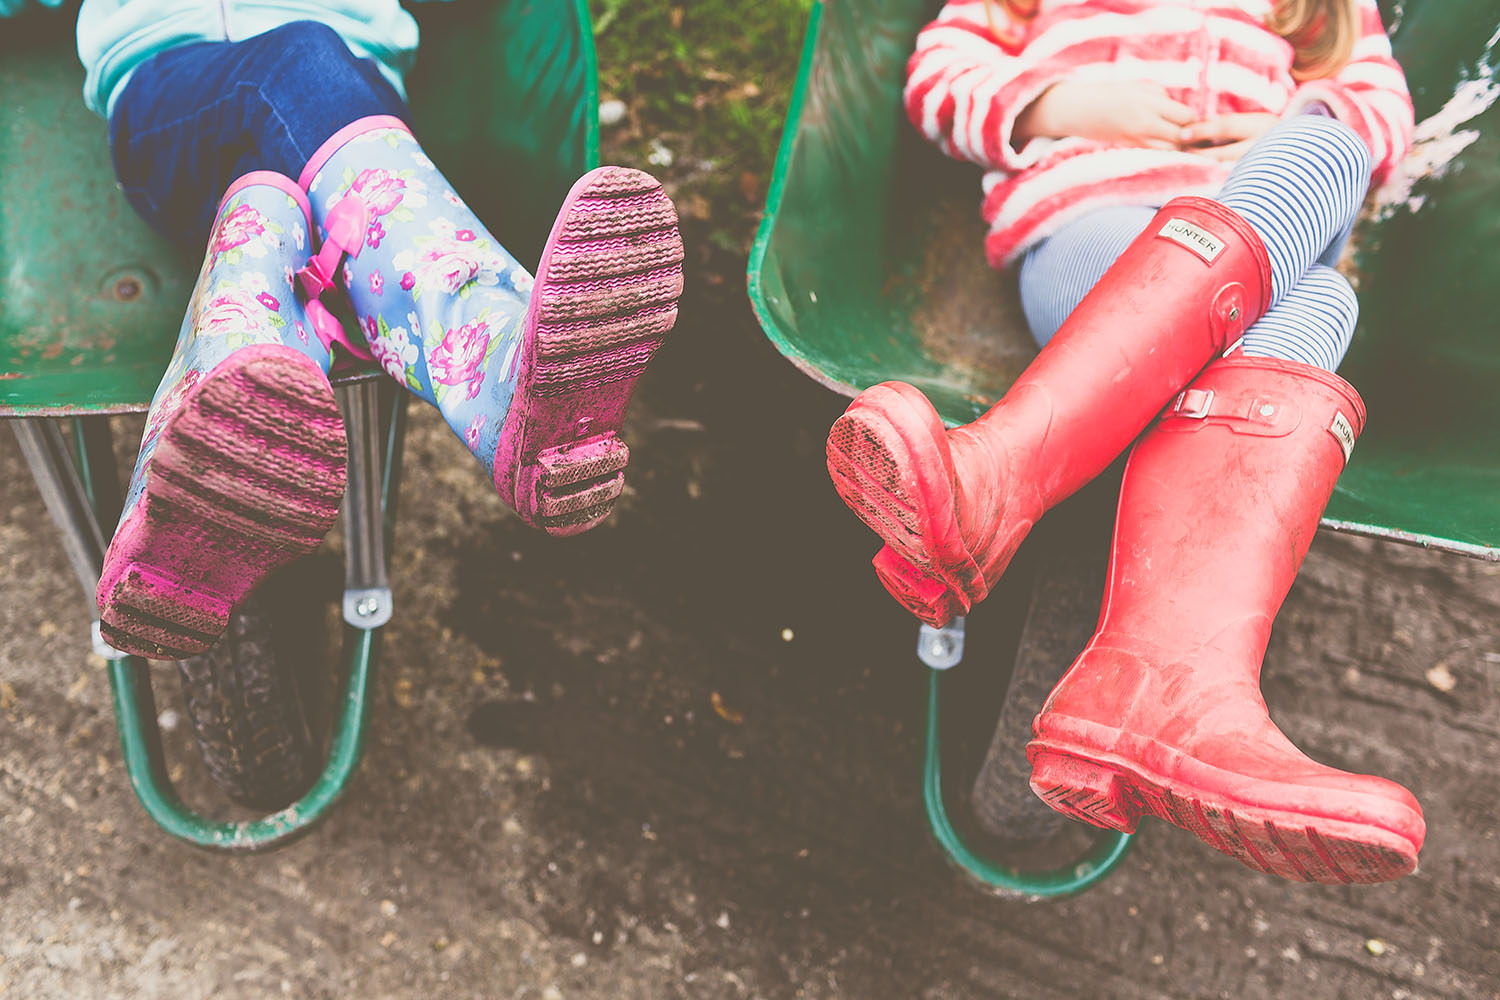 Children sitting in a wheel barrow with wellies on